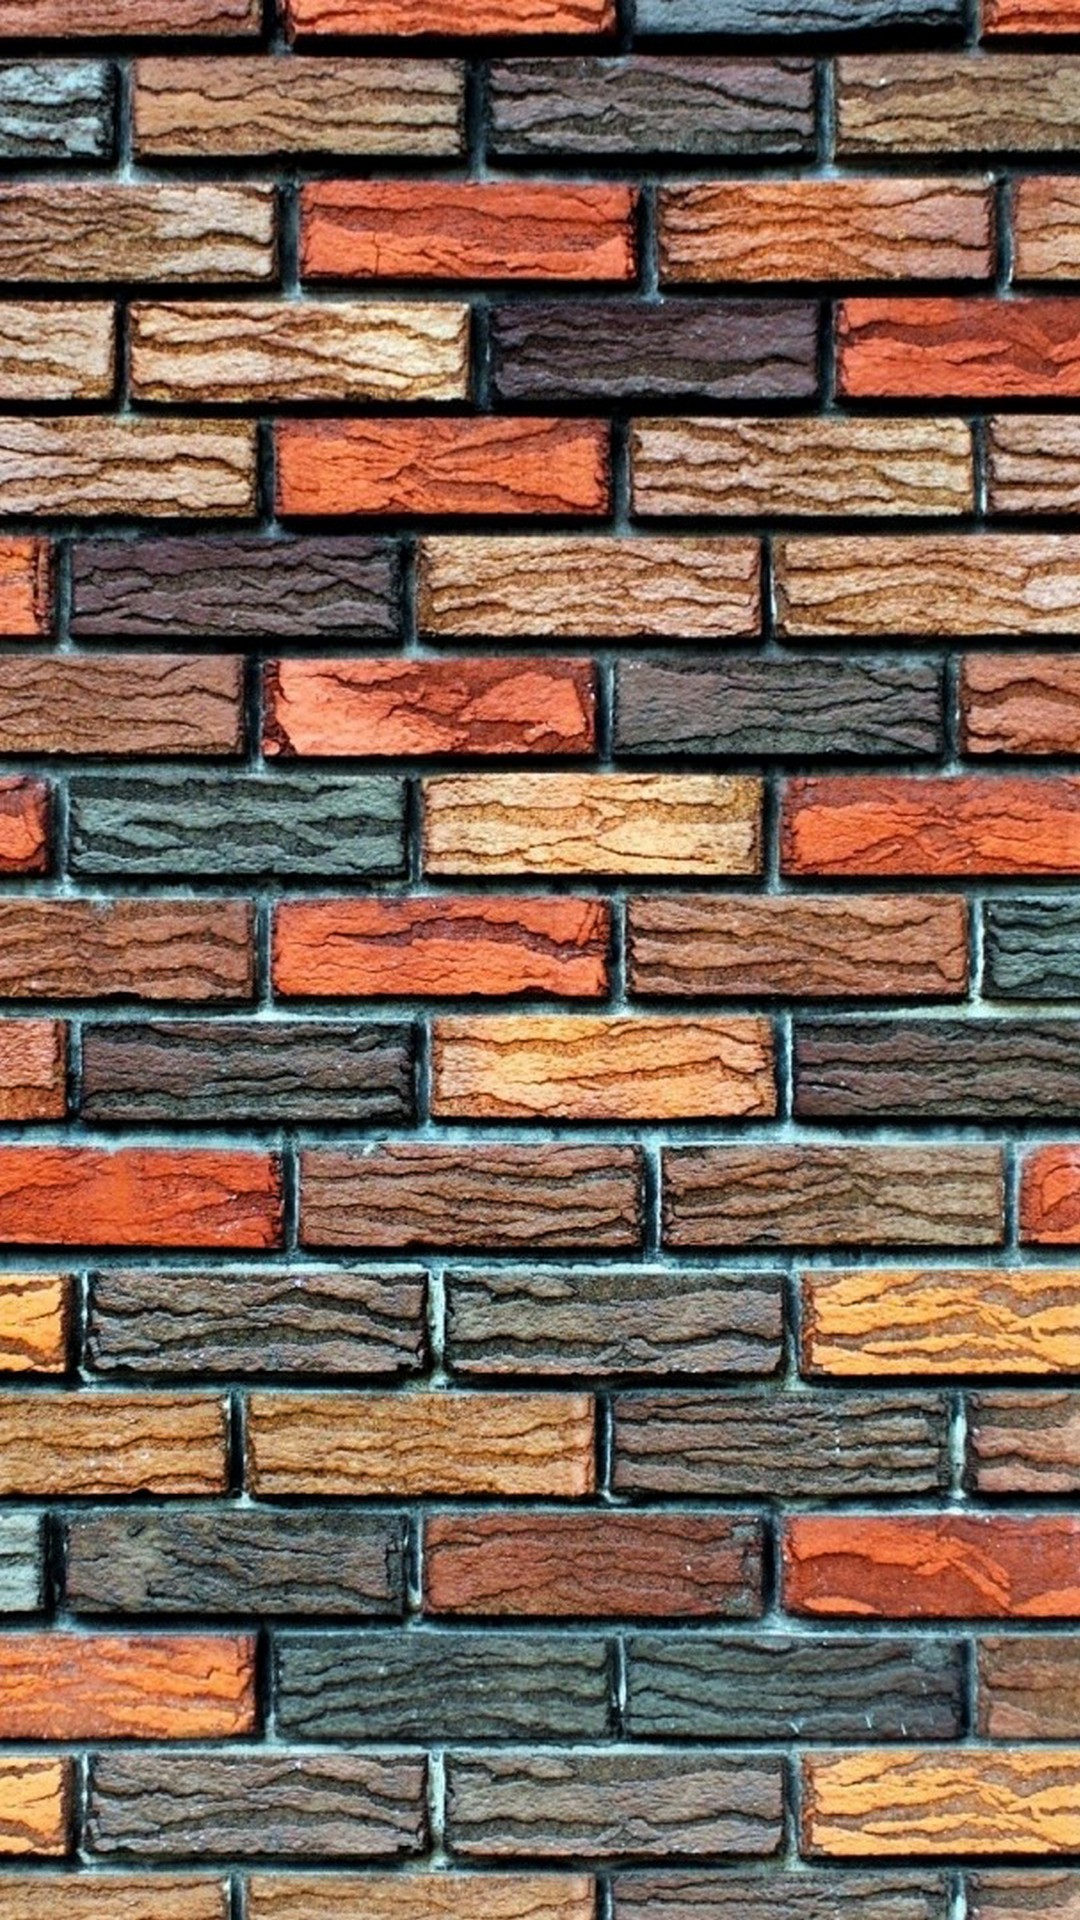 Brick iPhone Wallpaper Lock Screen with high-resolution 1080x1920 pixel. You can set as wallpaper for Apple iPhone X, XS Max, XR, 8, 7, 6, SE, iPad. Enjoy and share your favorite HD wallpapers and background images